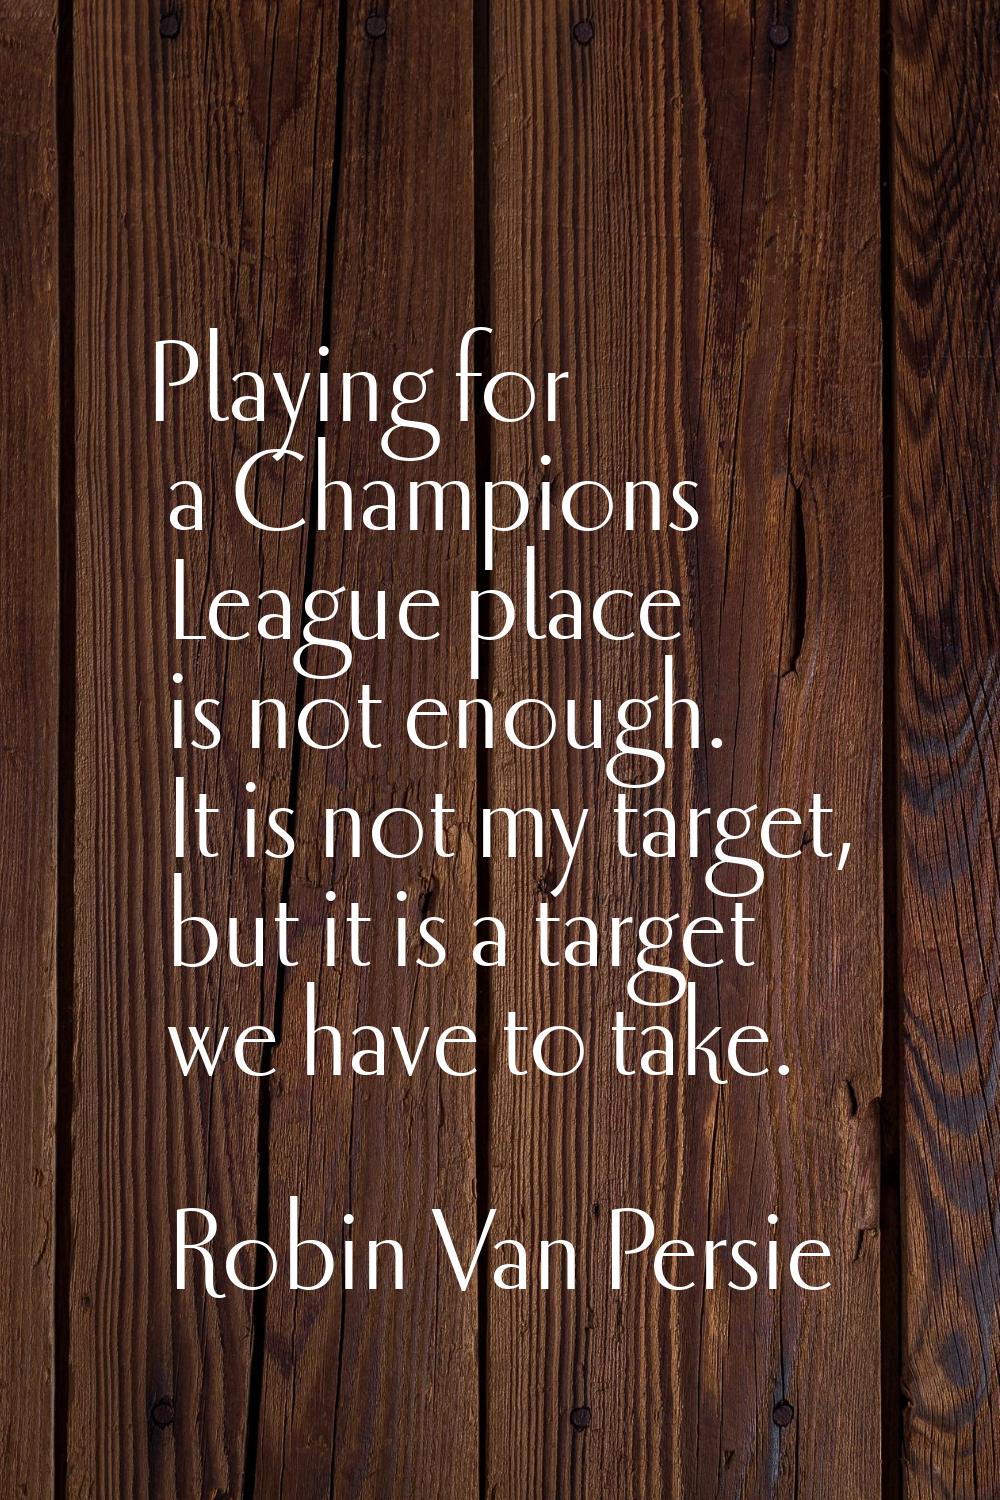 Playing for a Champions League place is not enough. It is not my target, but it is a target we have